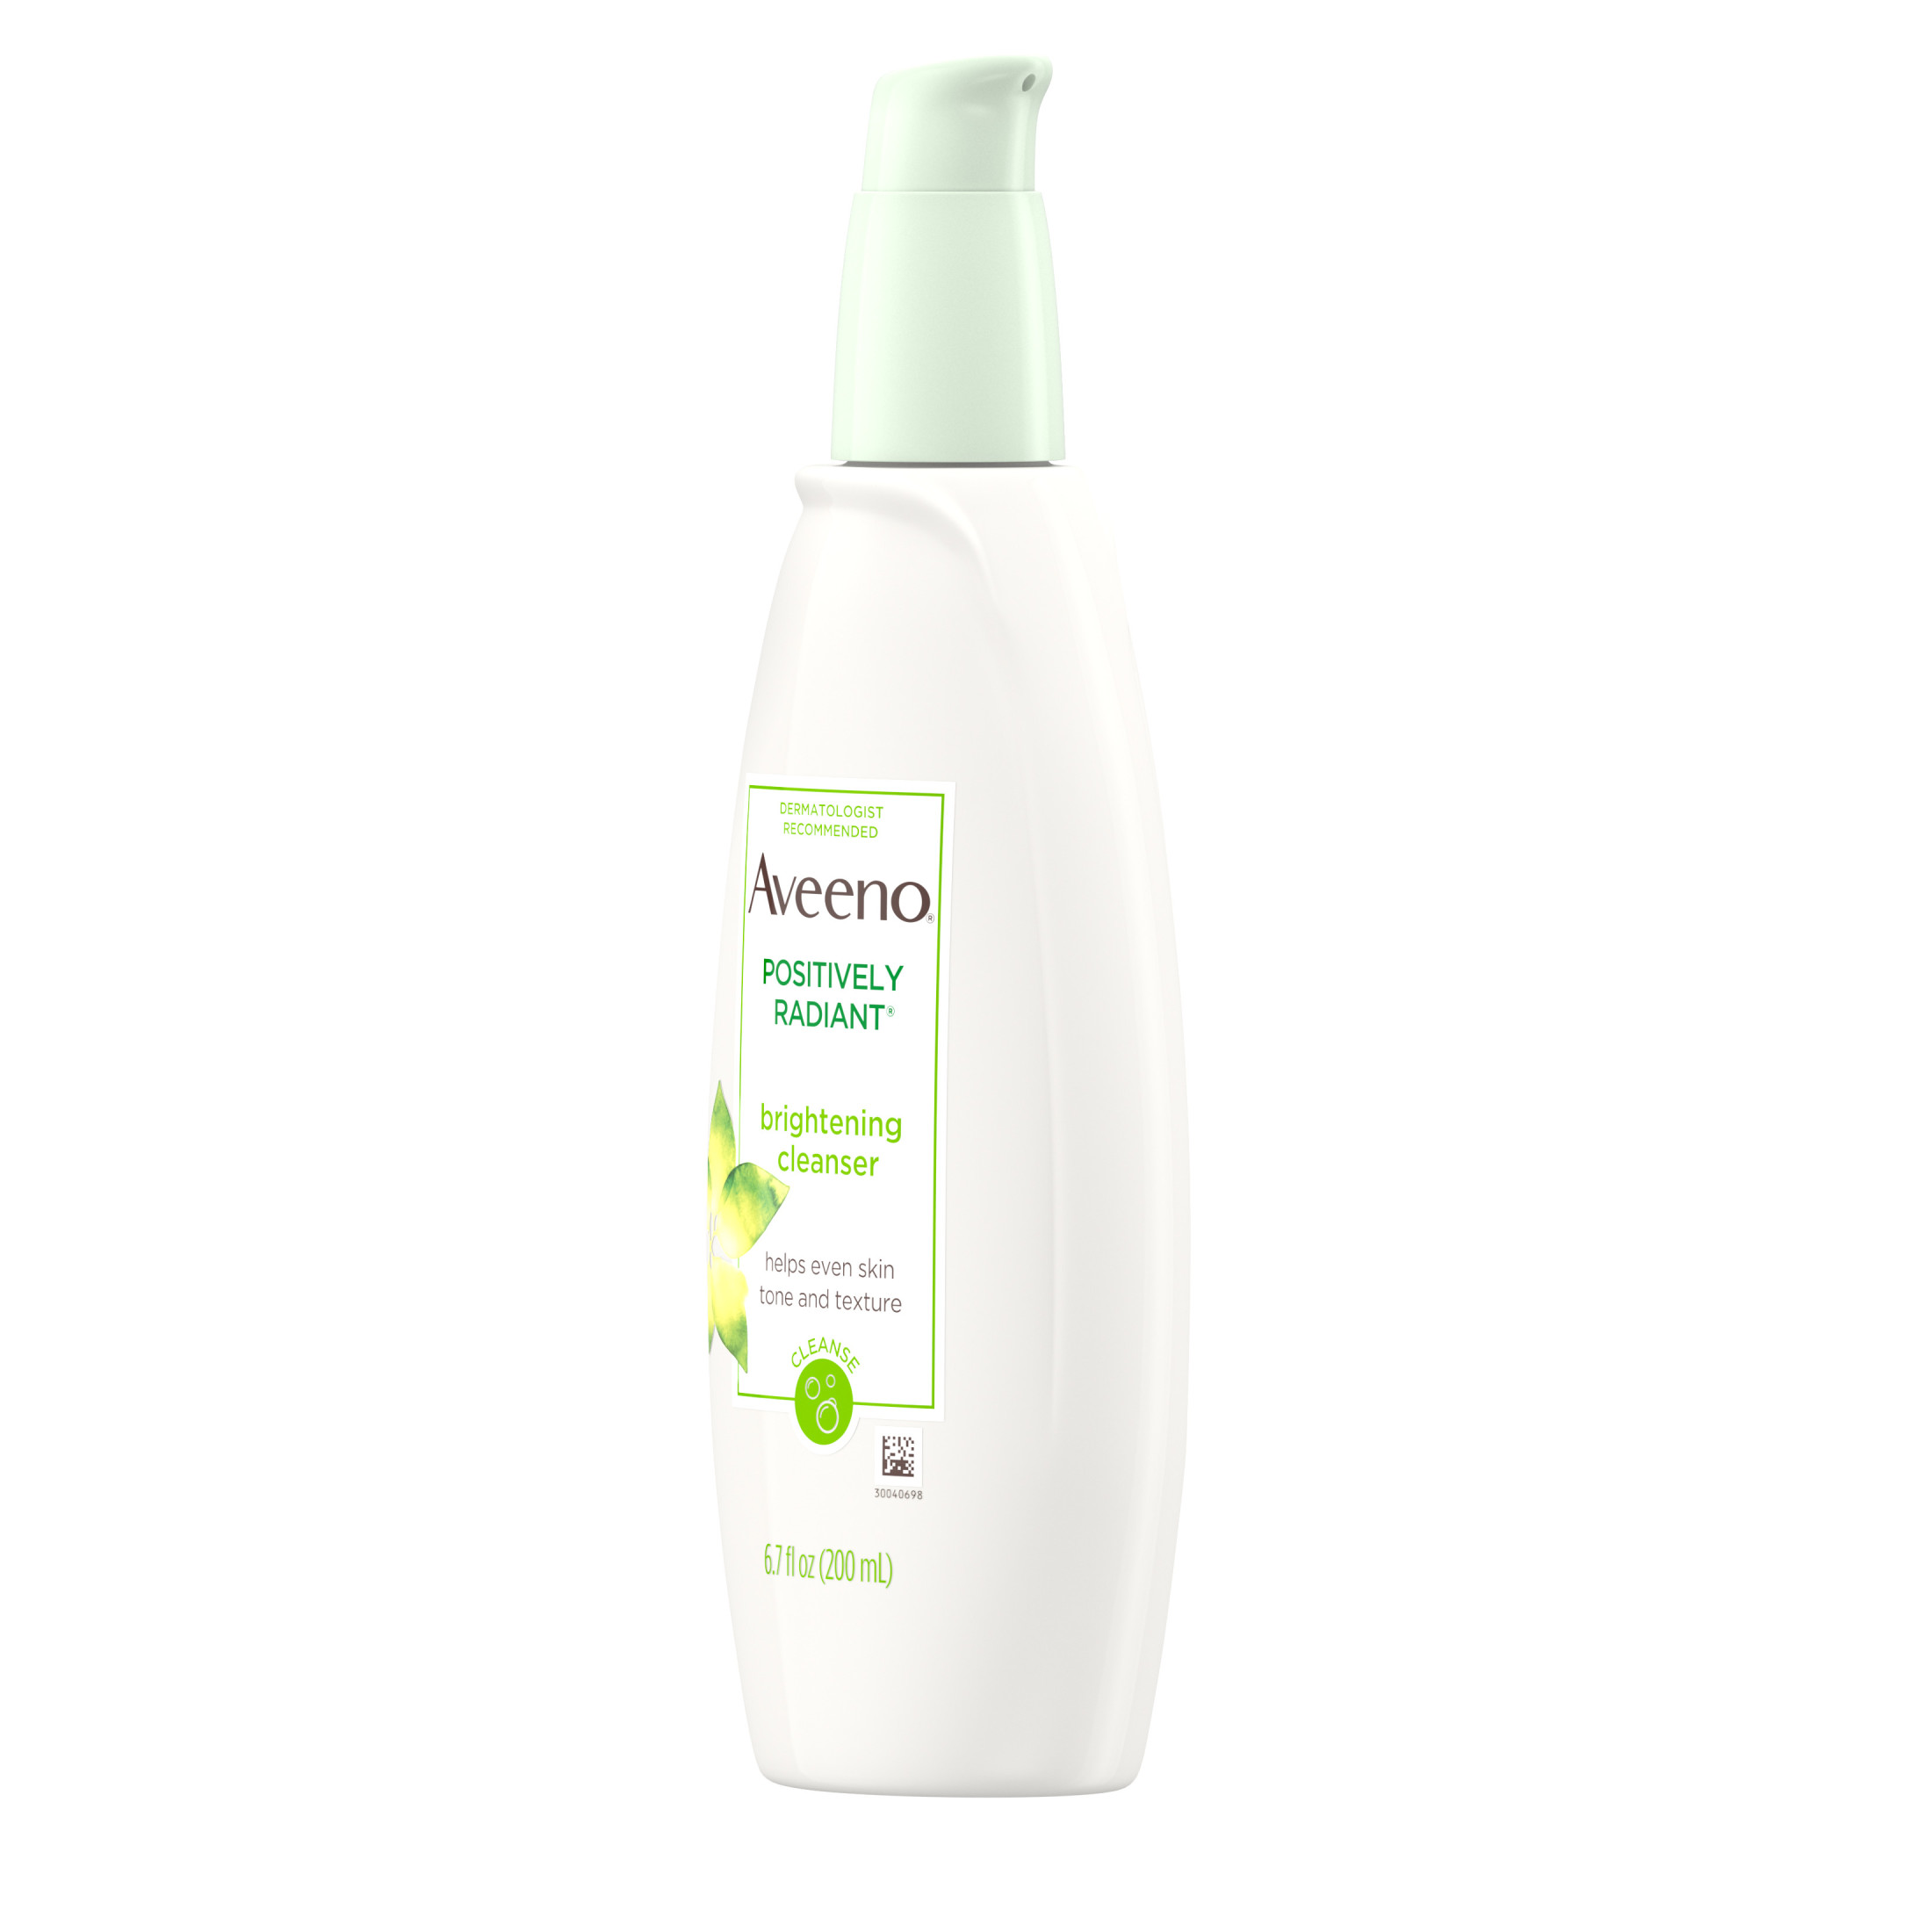 Aveeno Positively Radiant Brightening Facial Cleanser, 6.7 fl. oz - image 4 of 6